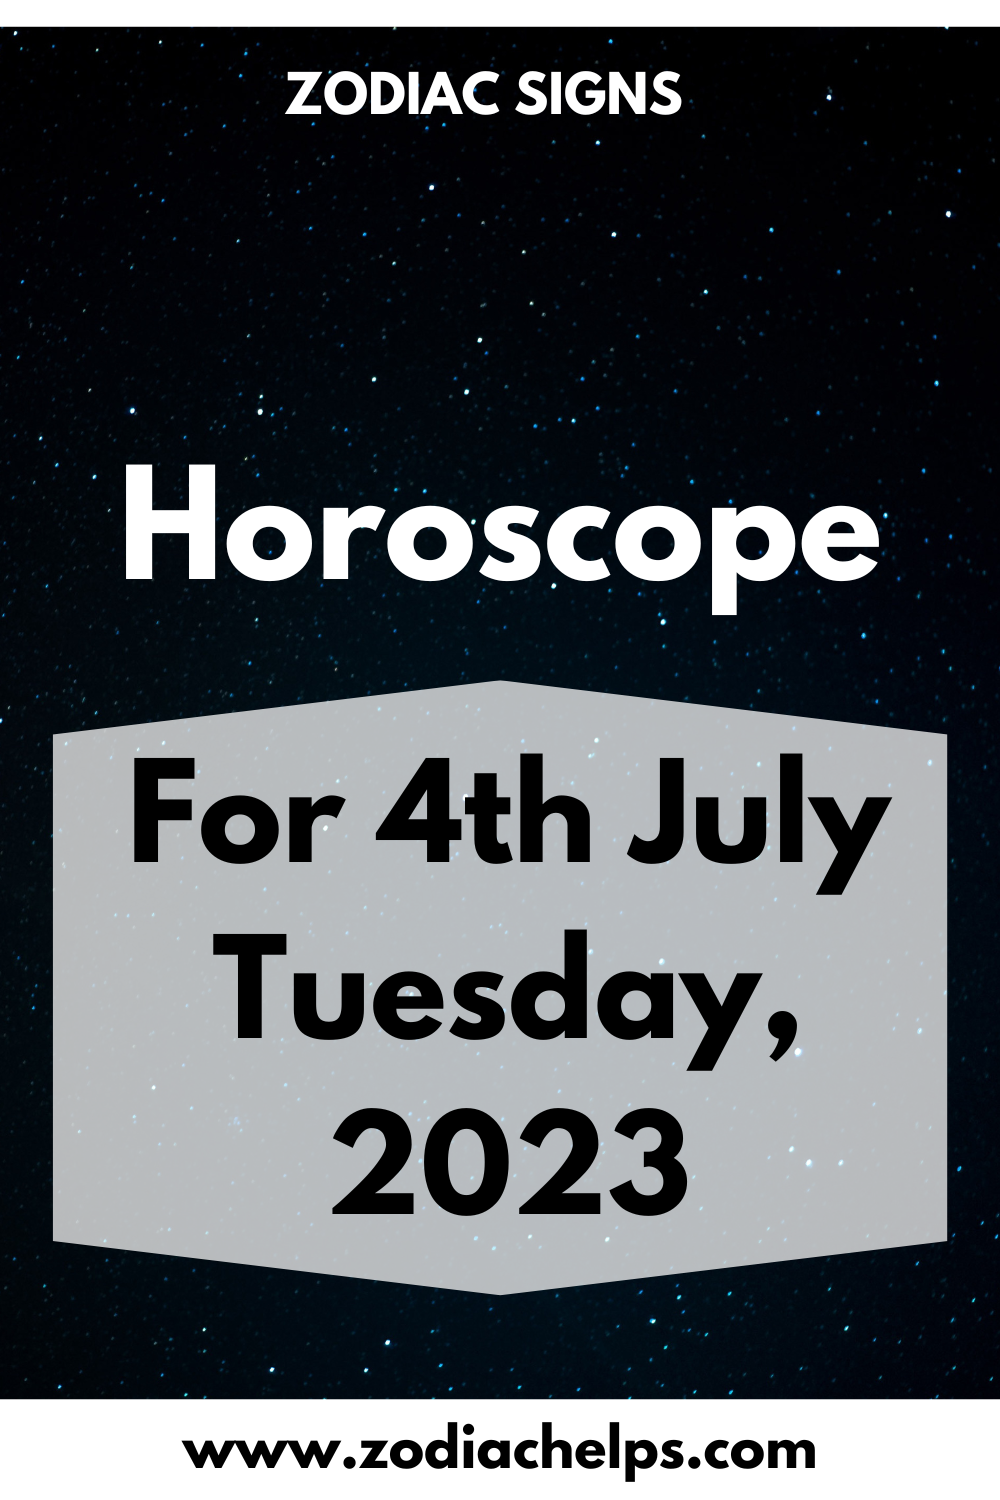 Horoscope for 4th July Tuesday, 2023